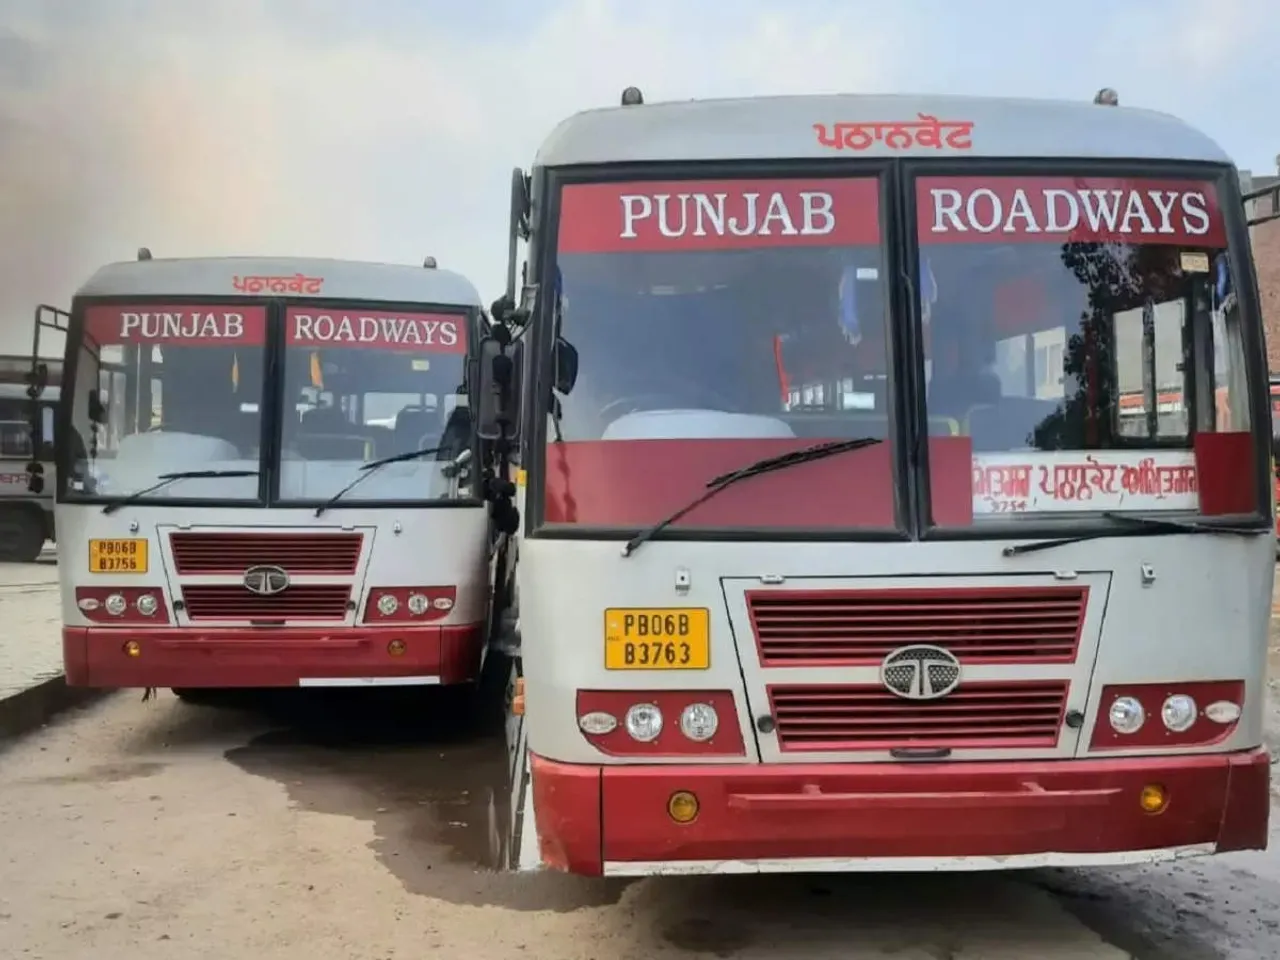 Buses missing from roads as contractual employees of Punjab Roadways, PRTC go on strike